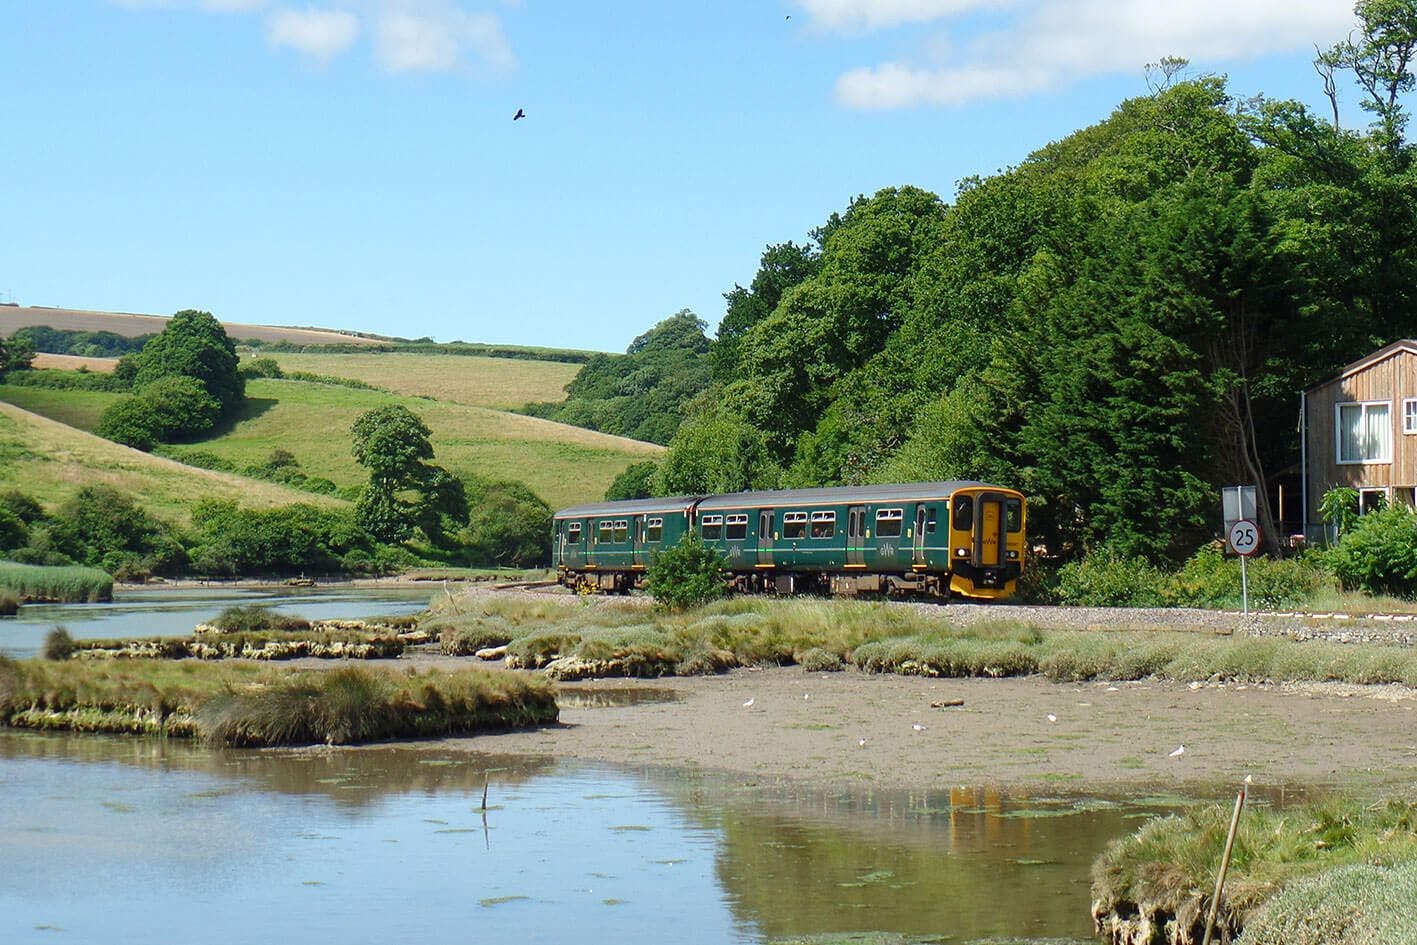 Catch the train to Looe